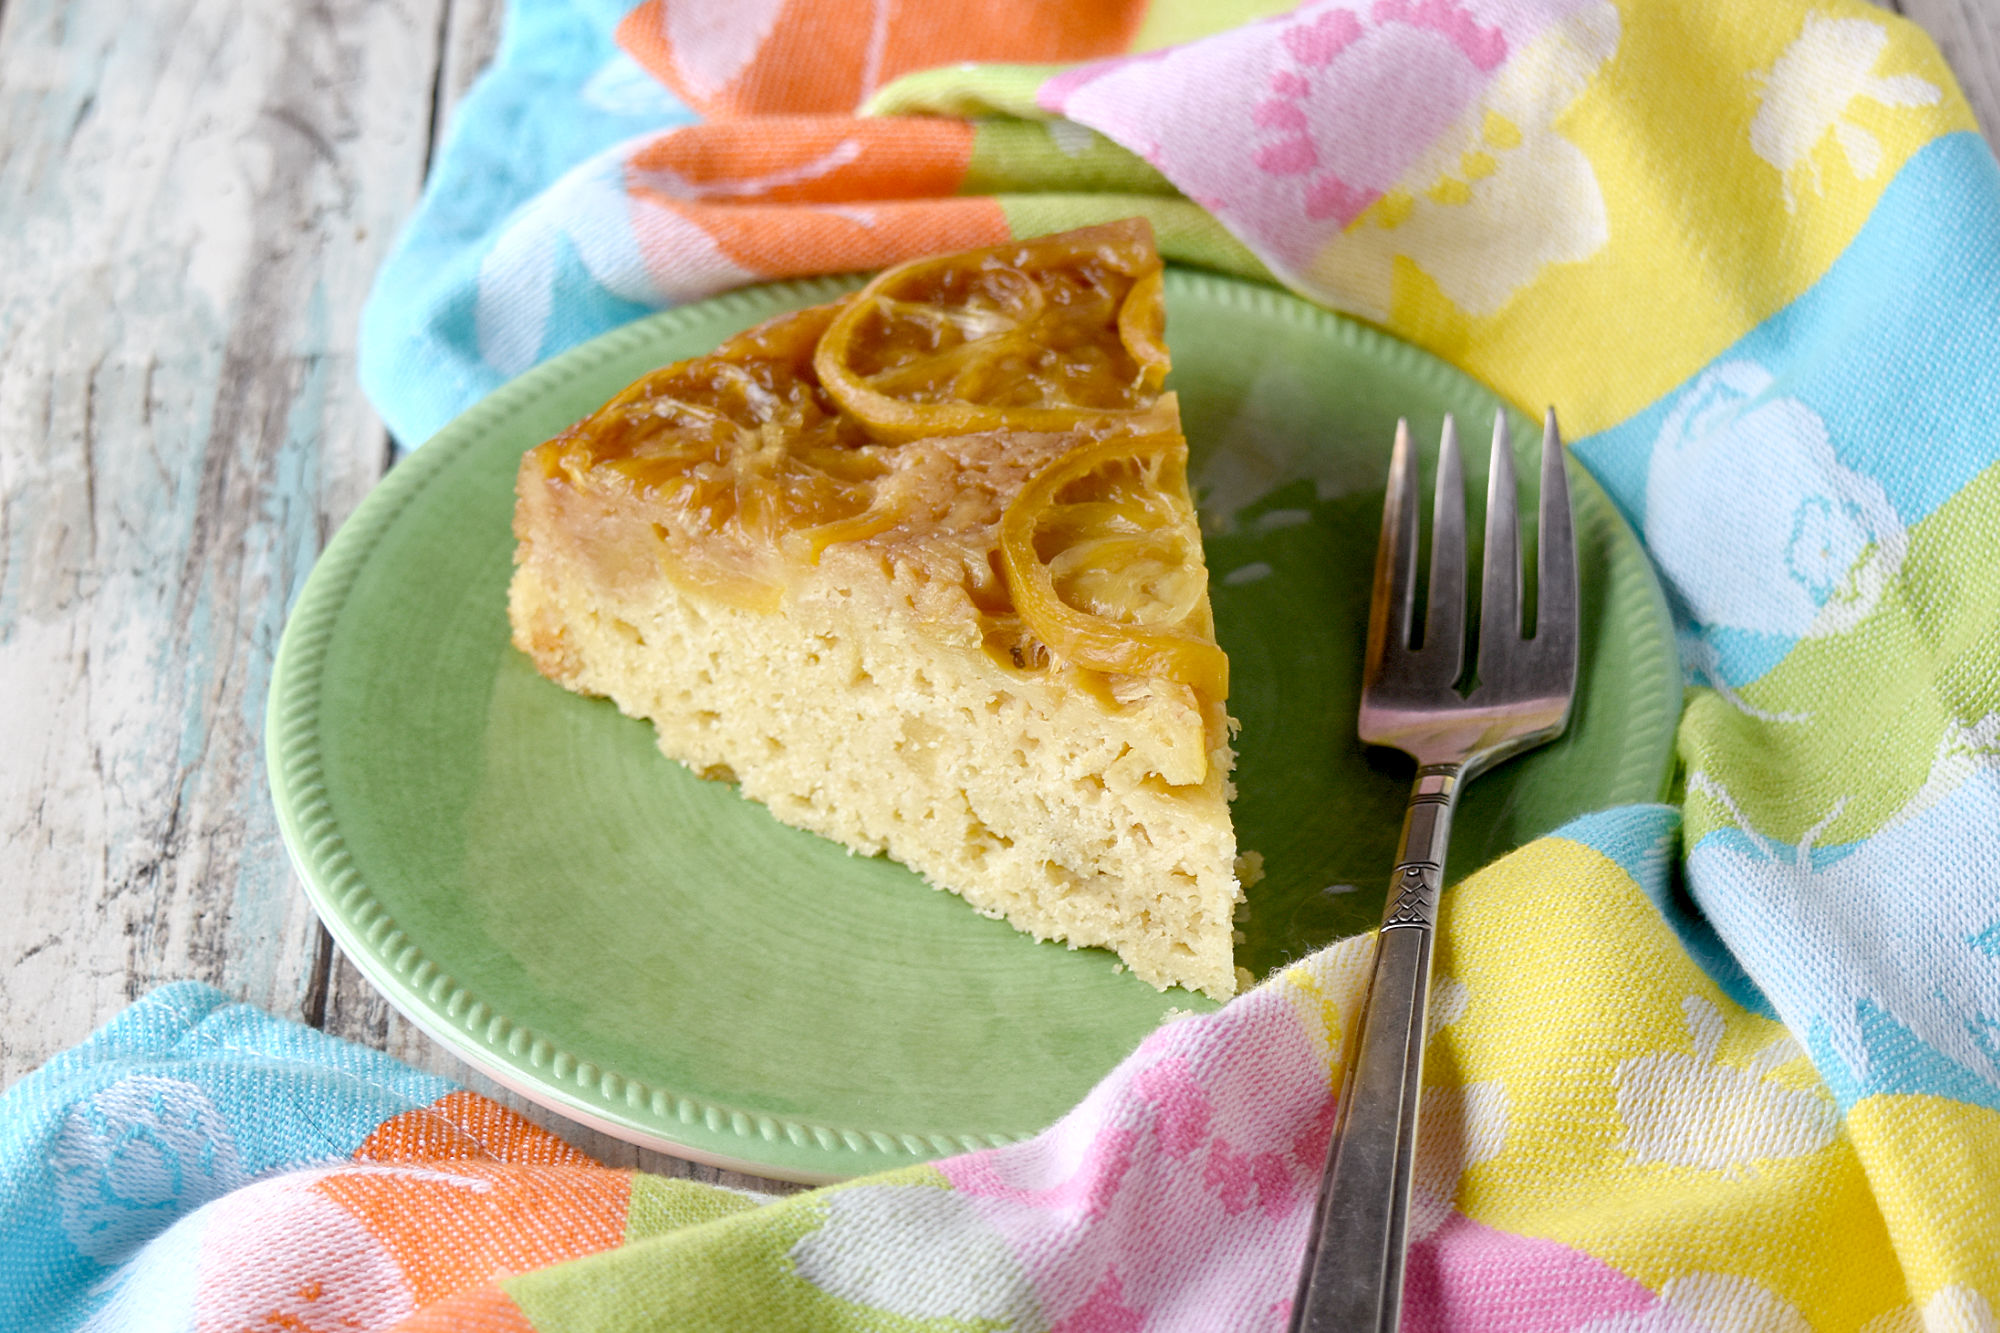 Meyer Lemon Upside Down Cake is super simple to make and tastes lemony and delicious. The cake is rustic with flecks of candied ginger throughout for a pleasant surprise.  #SpringSweetsWeek #Meyerlemon #lemoncake #upsidedowncake